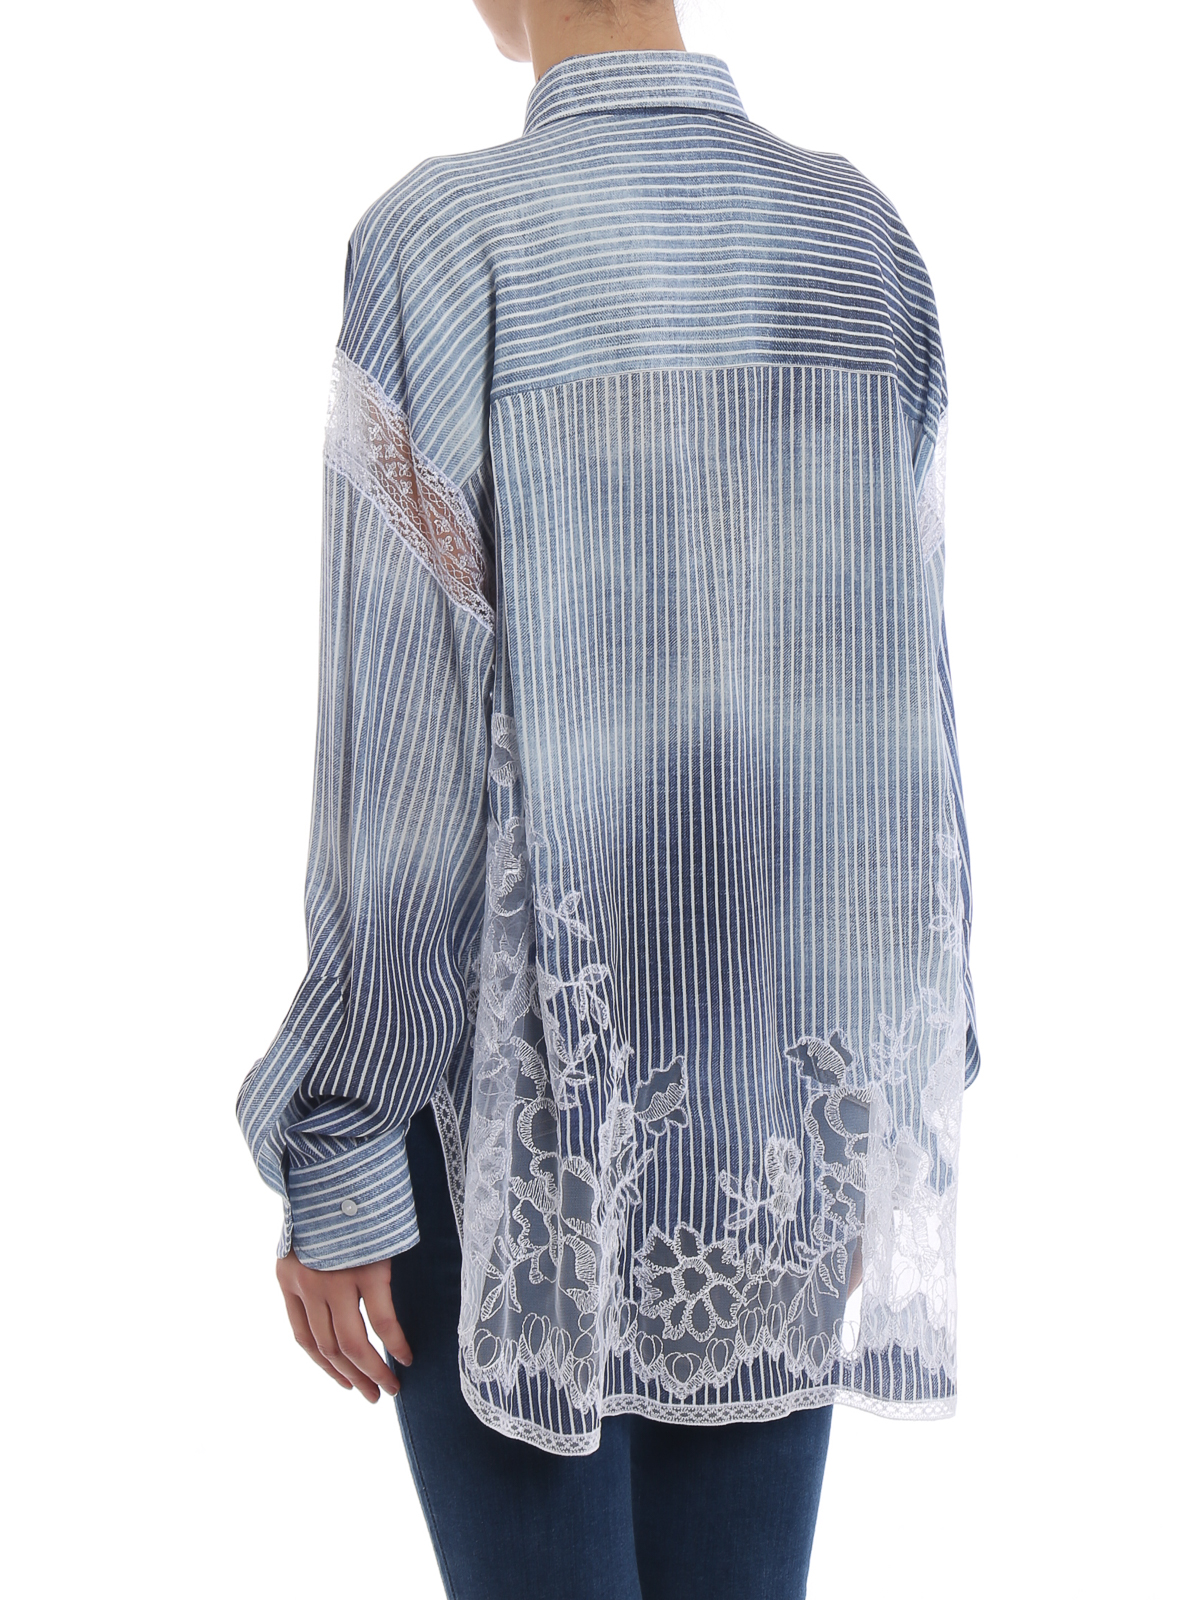 Shirts Ermanno Scervino - Blue striped and lace insert over shirt 